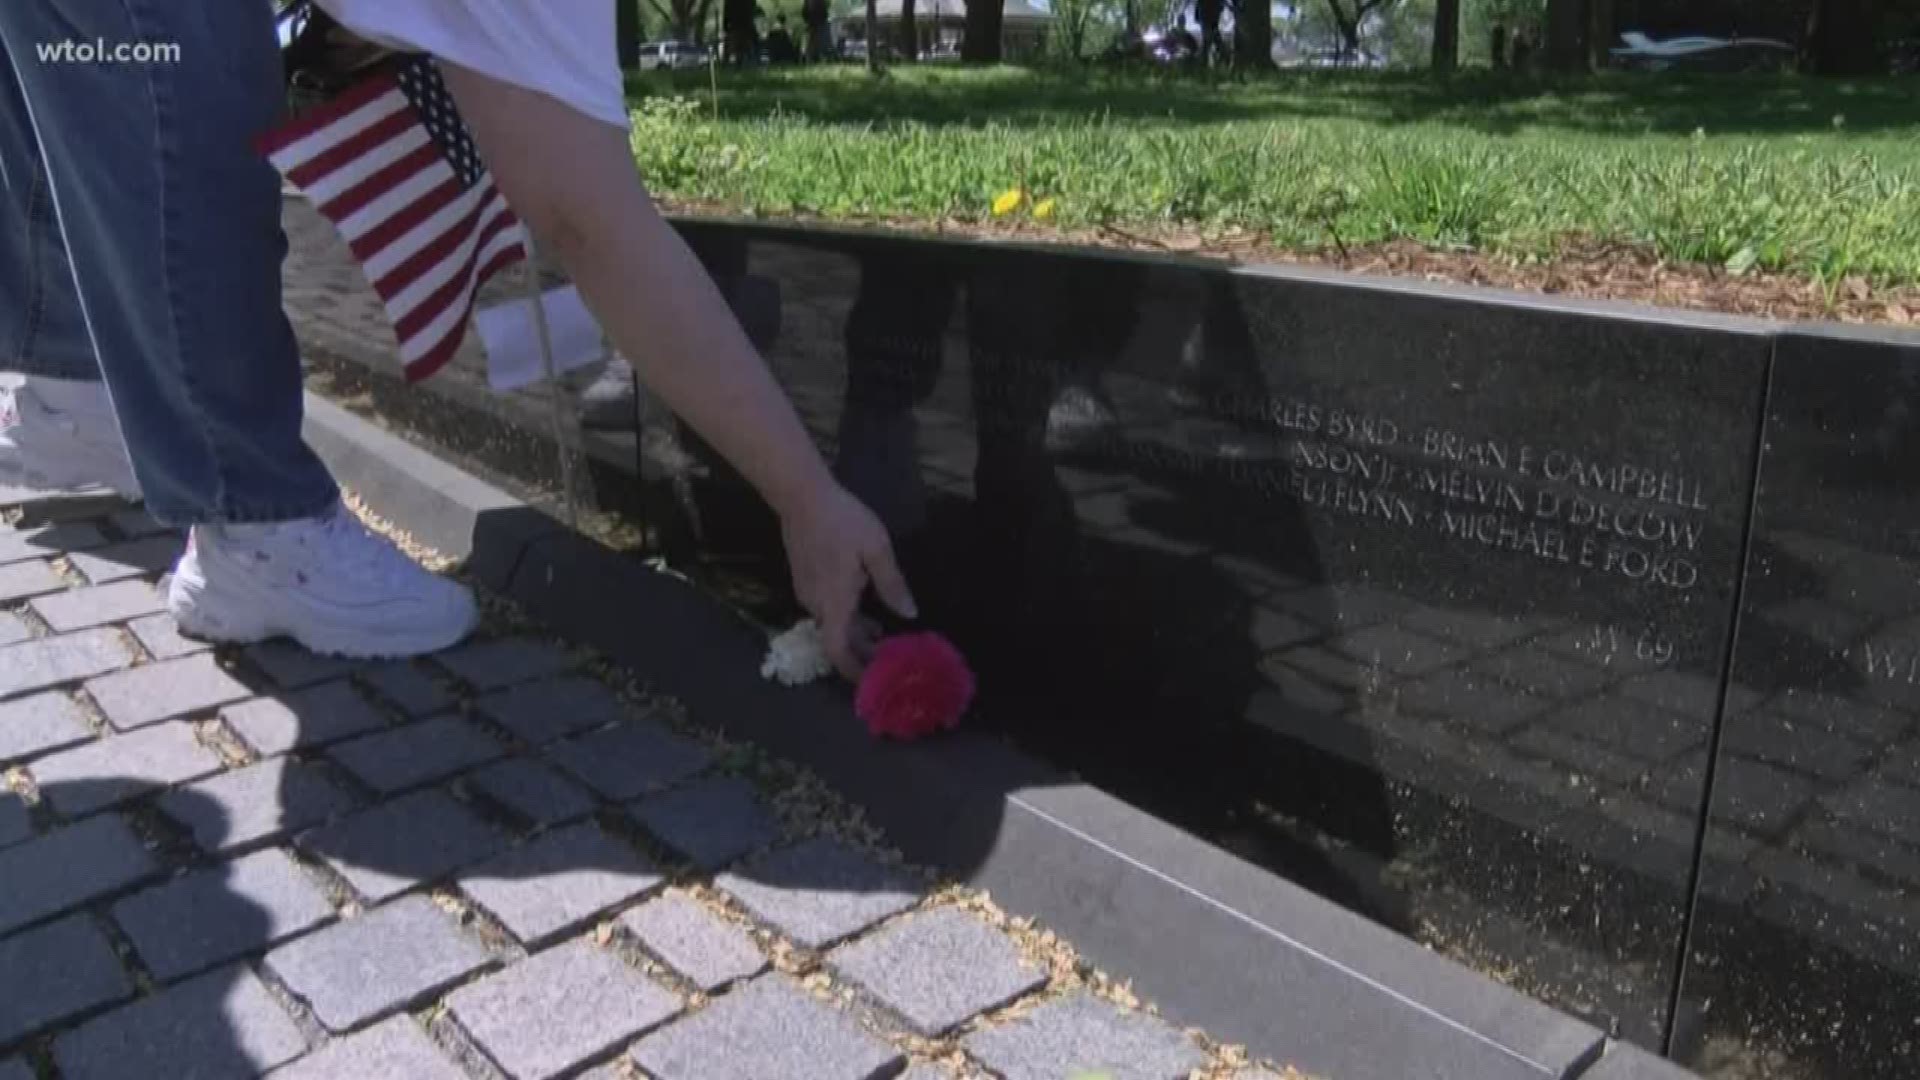 Local Vietnam veterans look for names of their fallen comrades in emotional part of DC trip